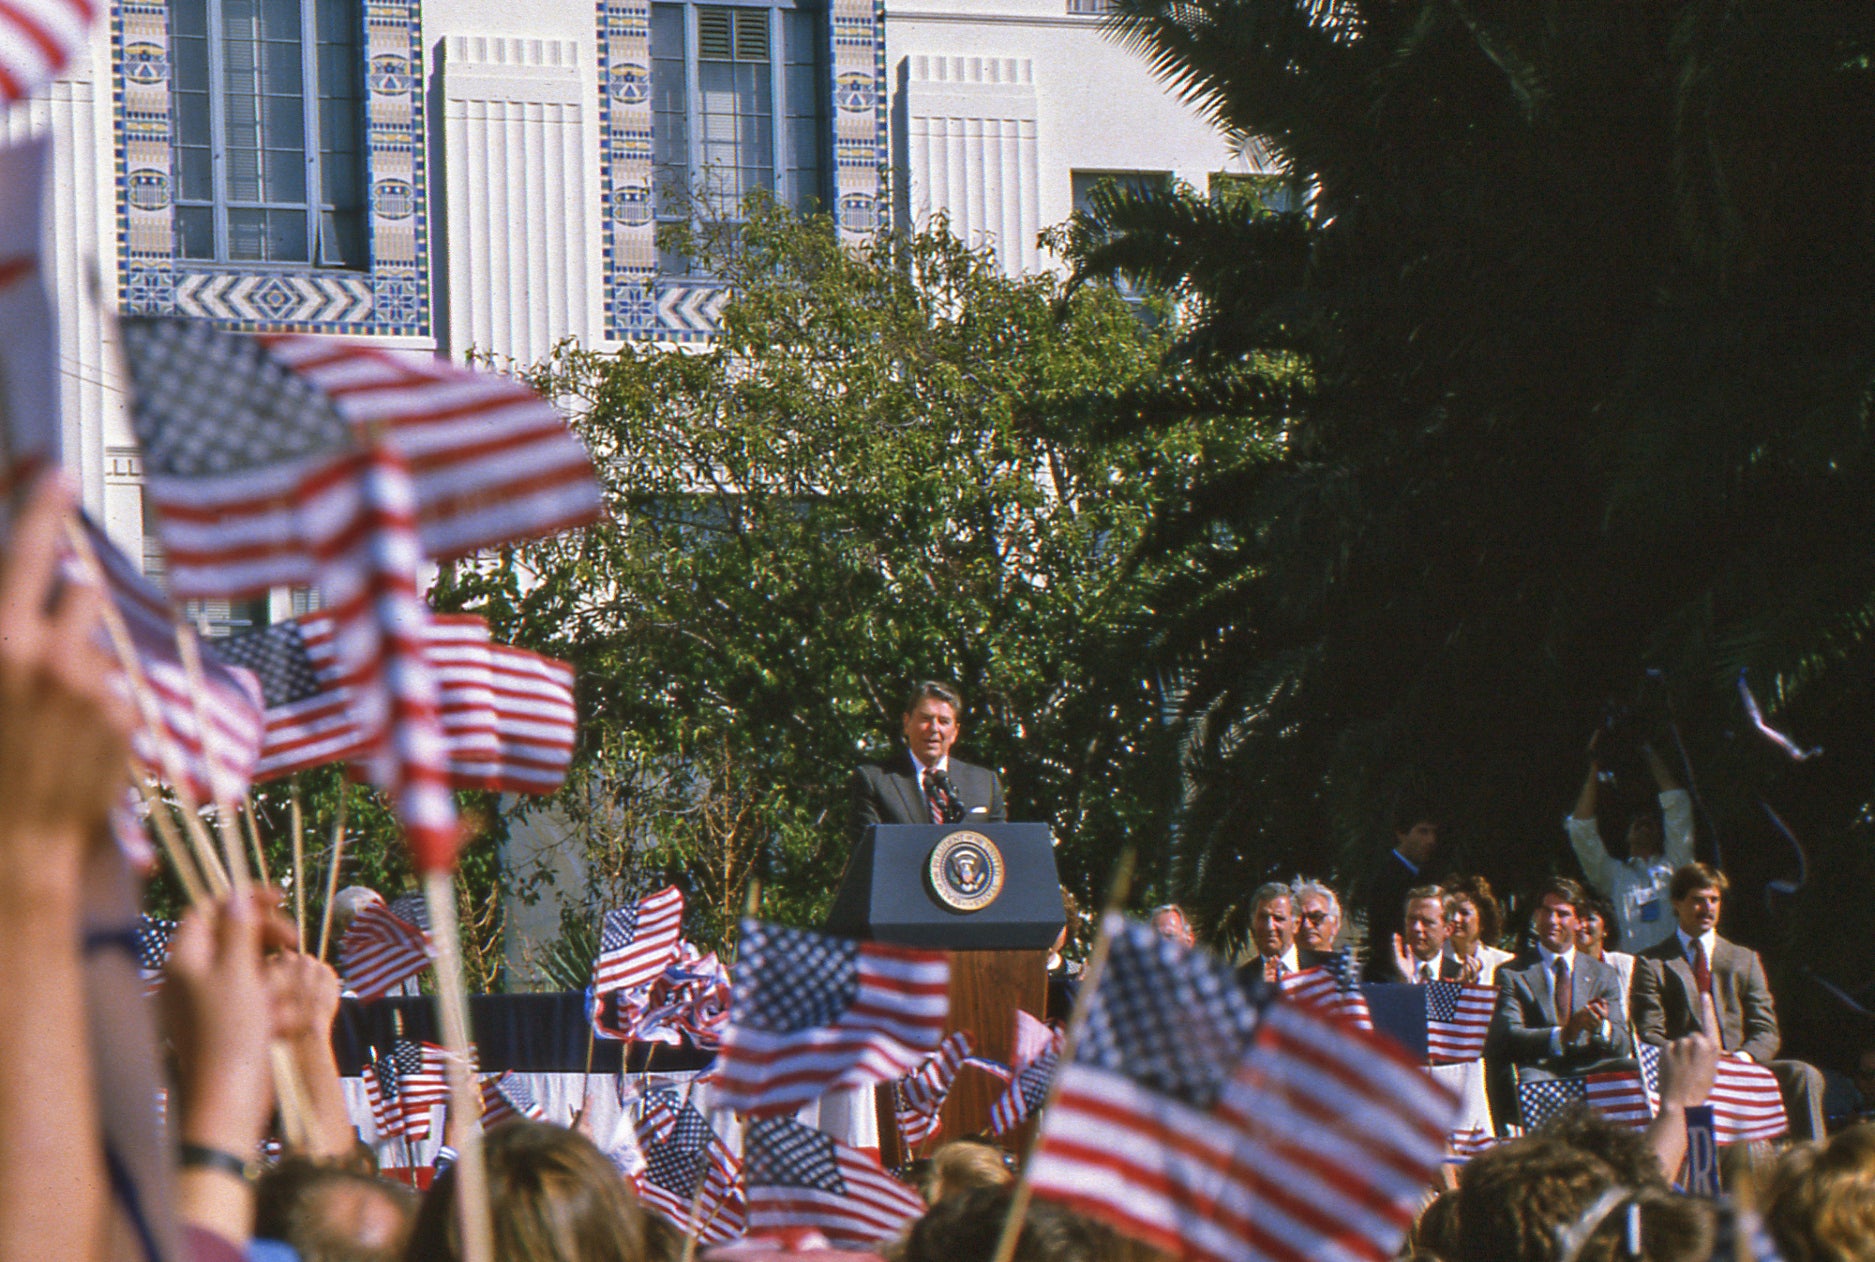 President Ronald Reagan giving a speech at a campaign rally at the San Diego County Administration building in 1984.